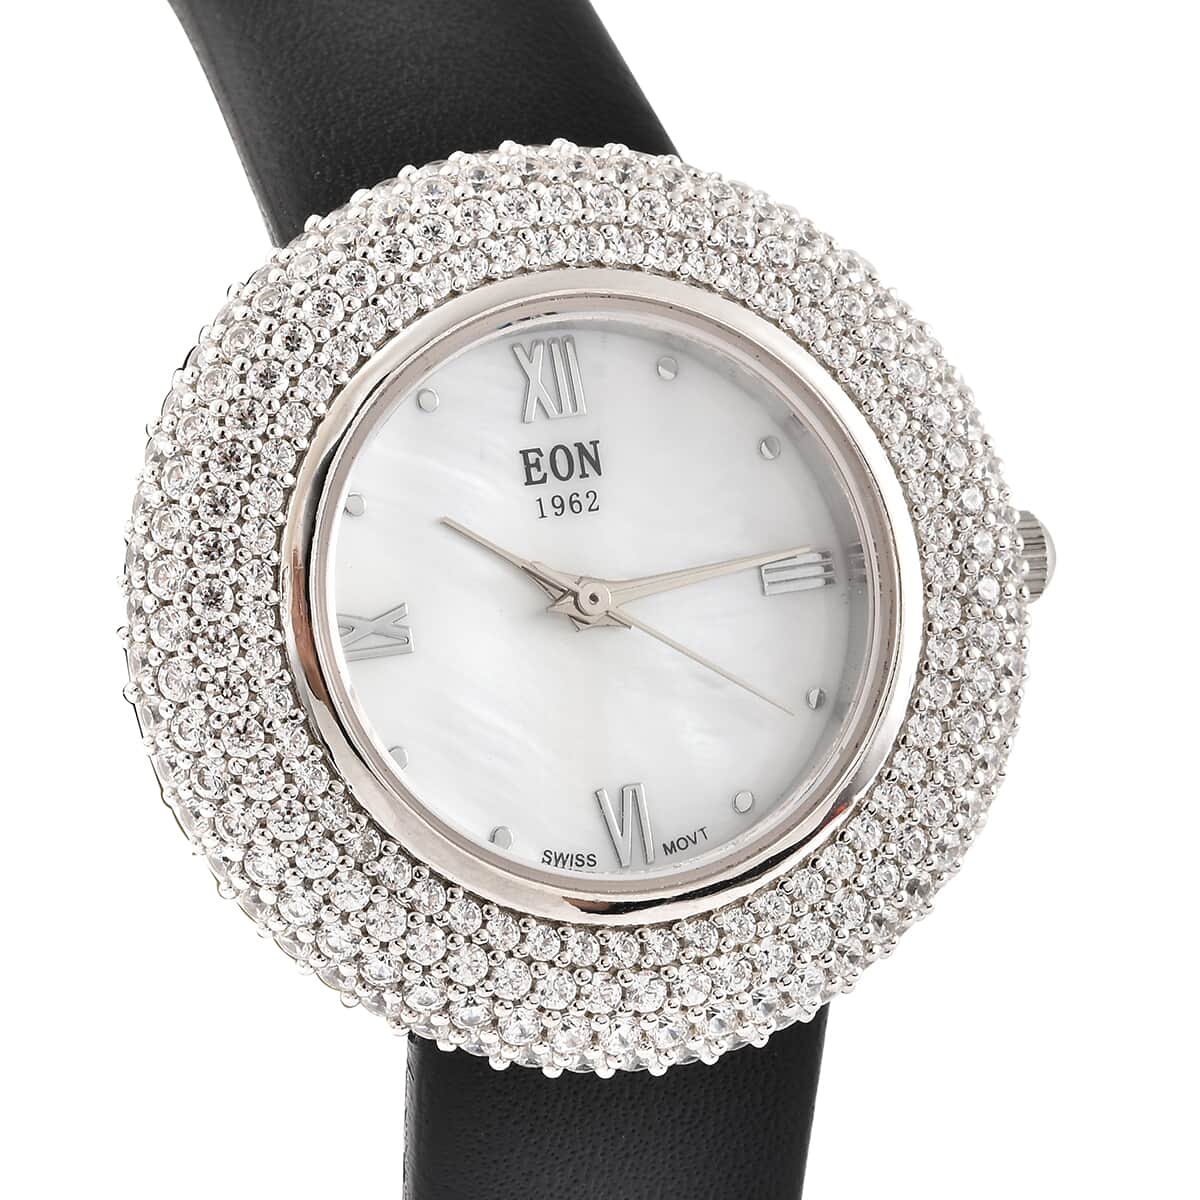 Eon 1962 White Crystal Swiss Movement MOP Dial Watch in Sterling Silver with Black Leather Strap image number 3